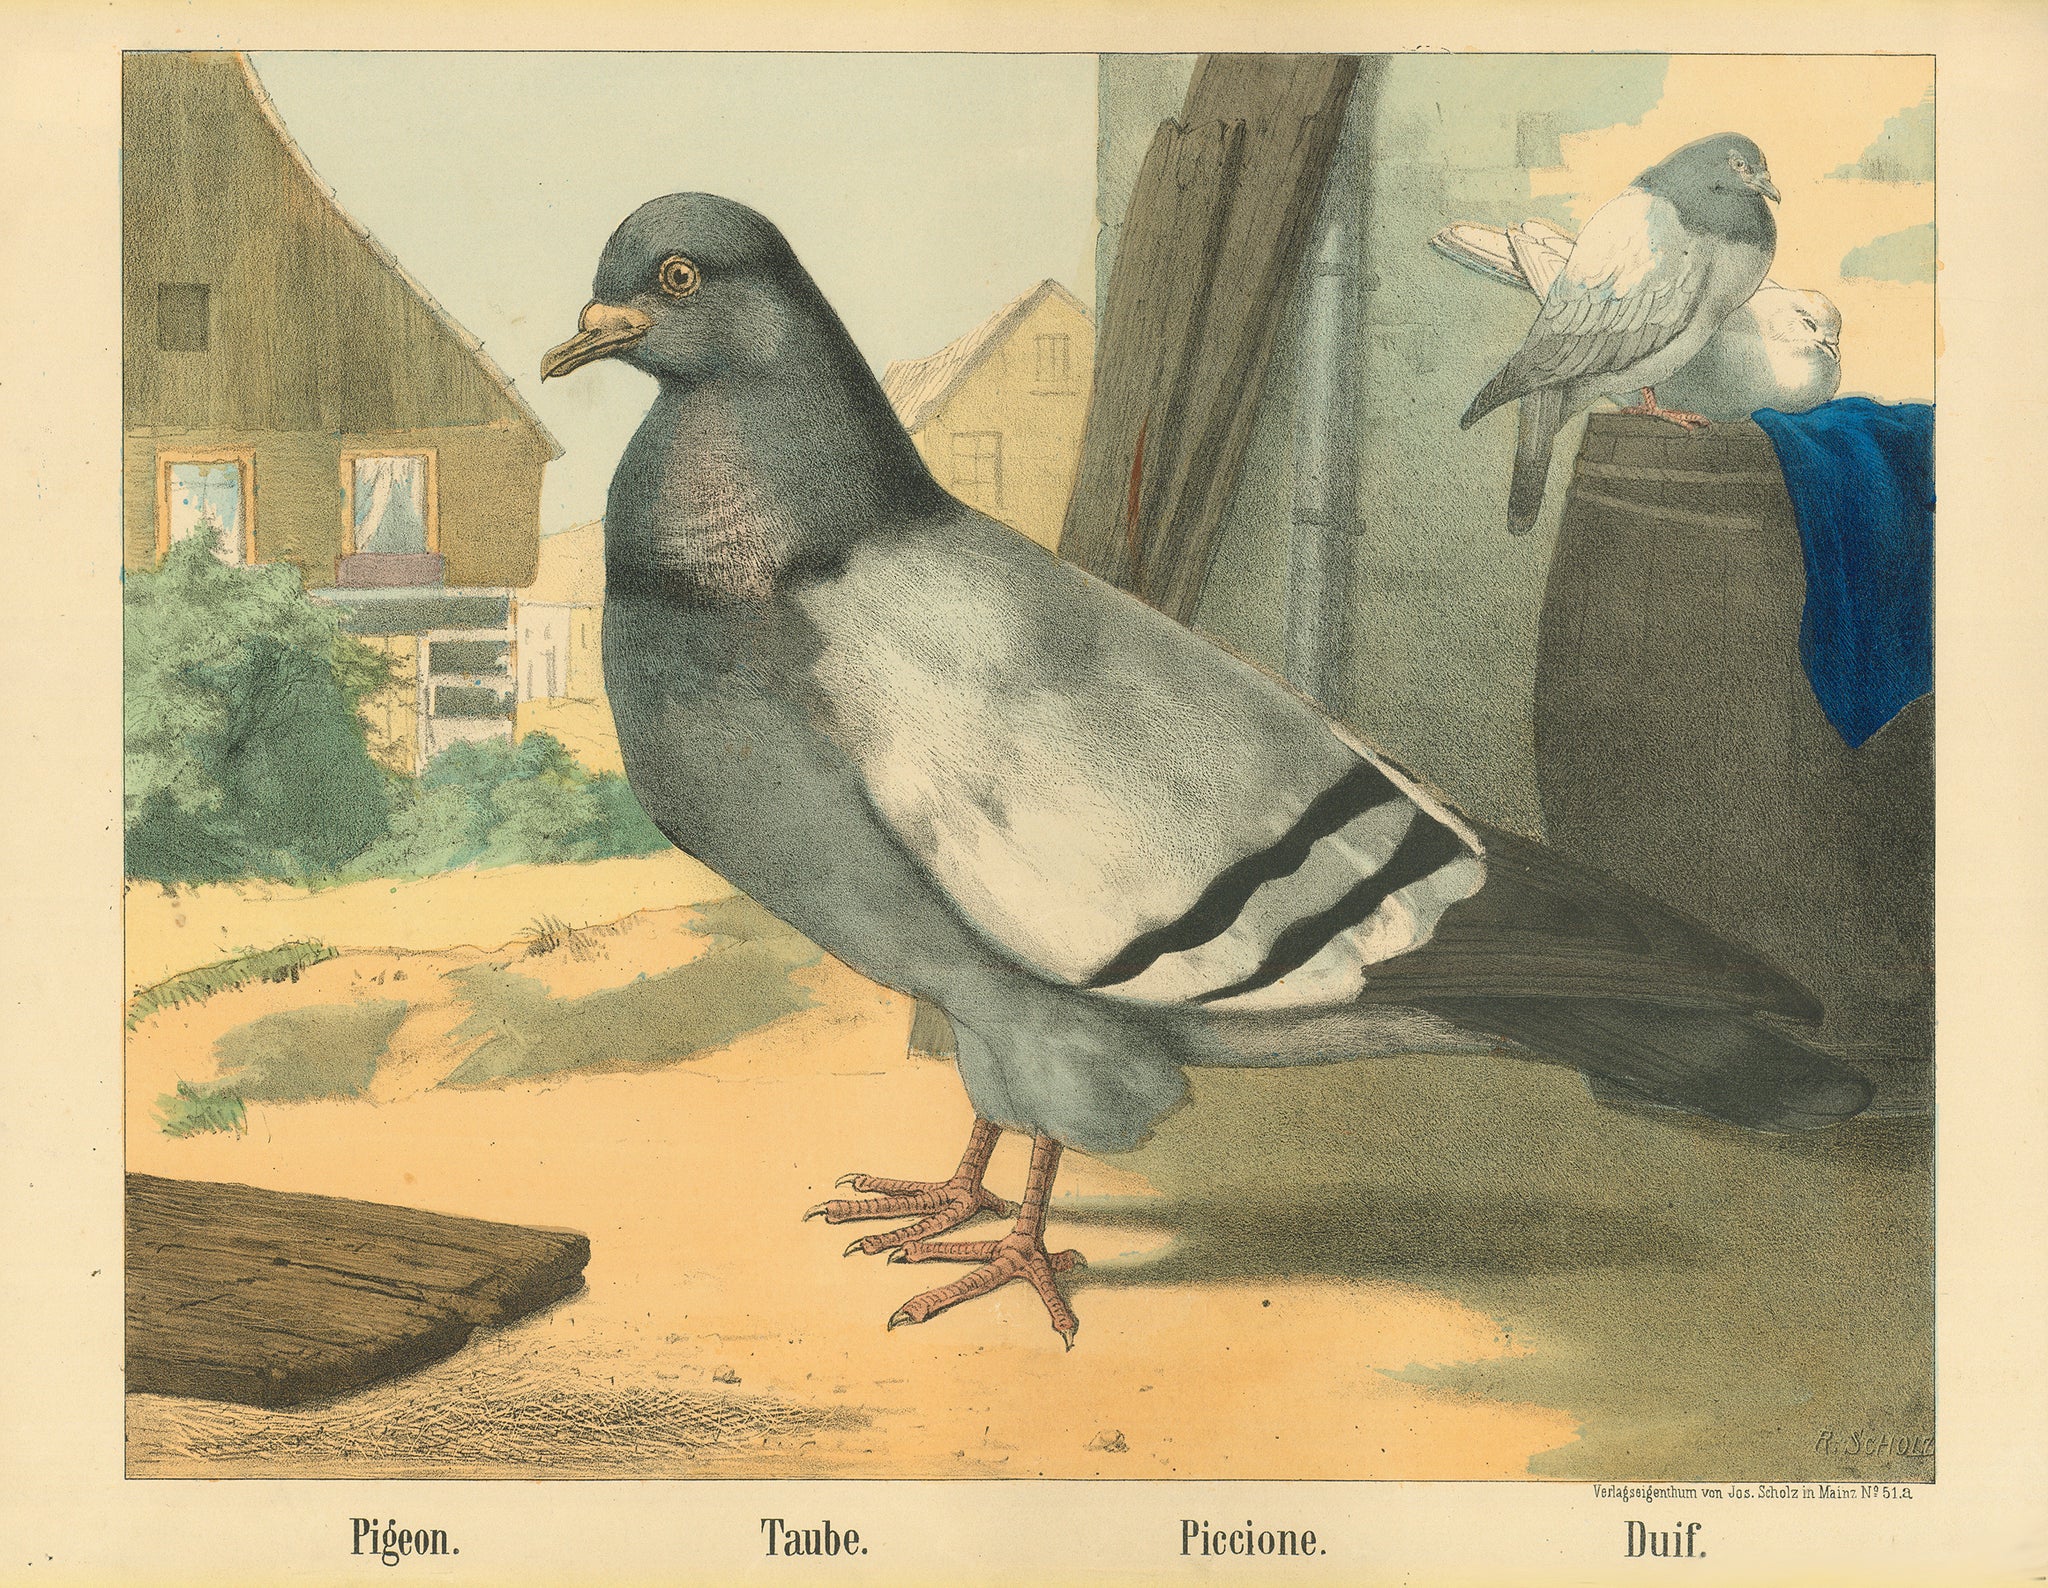 "Pigeon, Taube, Piccione, Duif"  Original antique print   Lithograph by R. Scholz. Printed in color by Joseph Scholz. Mainz, ca. 1880  A magnificent rendering of the common pigeon.